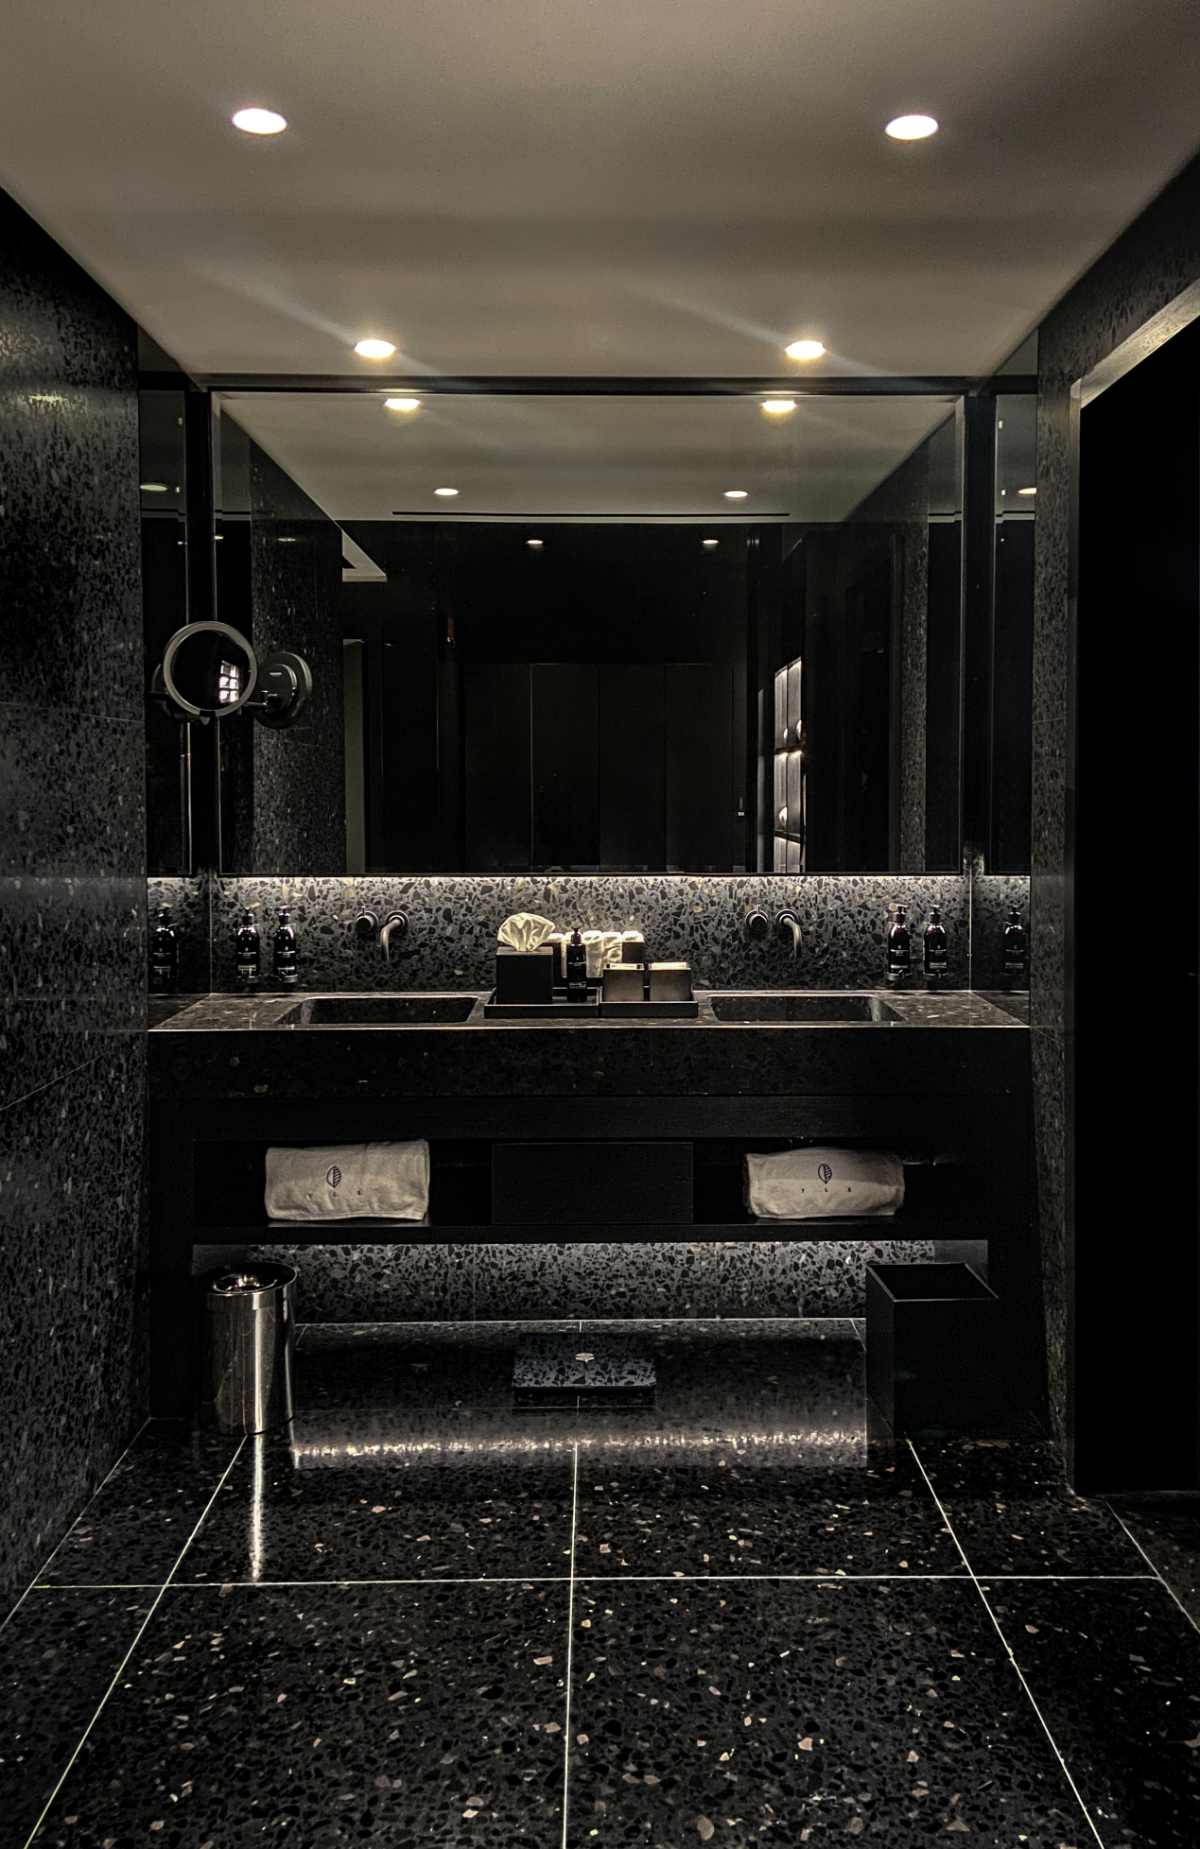 The Longevity Spa At The Portrait Milan Hotel - The First Luxury Spa In Black & White